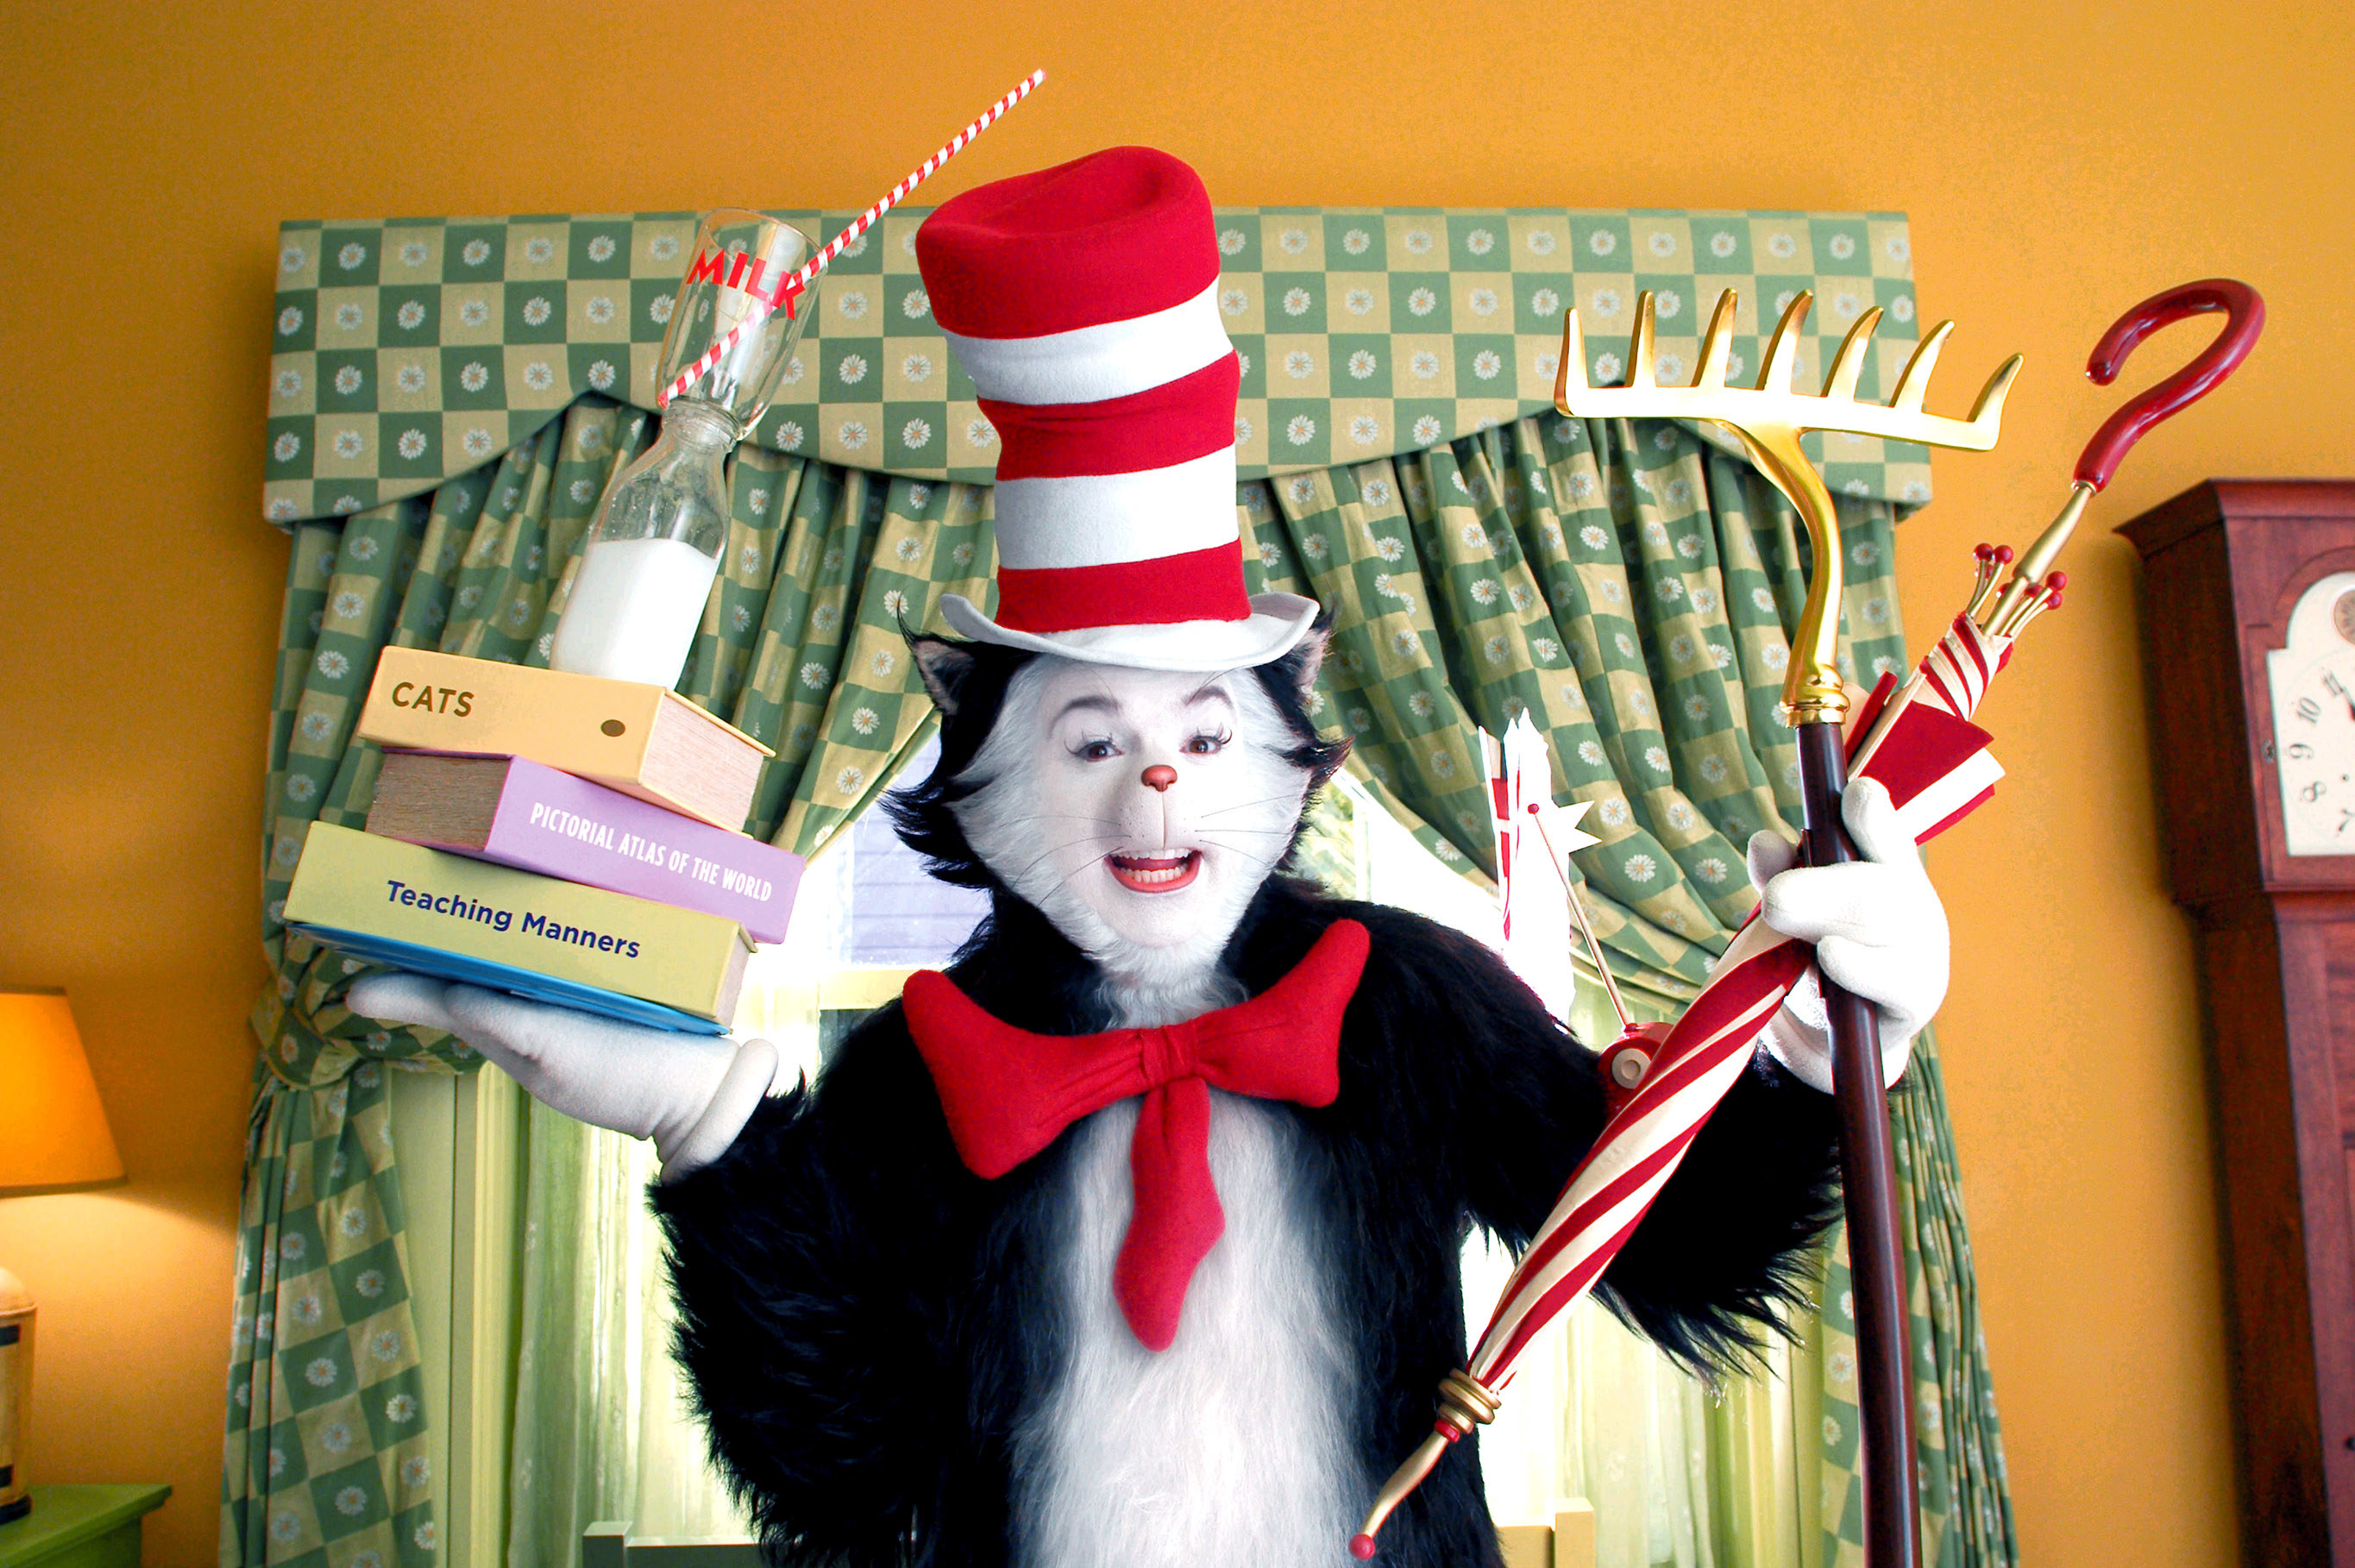 The cat in the hat balances books and milk in one hand